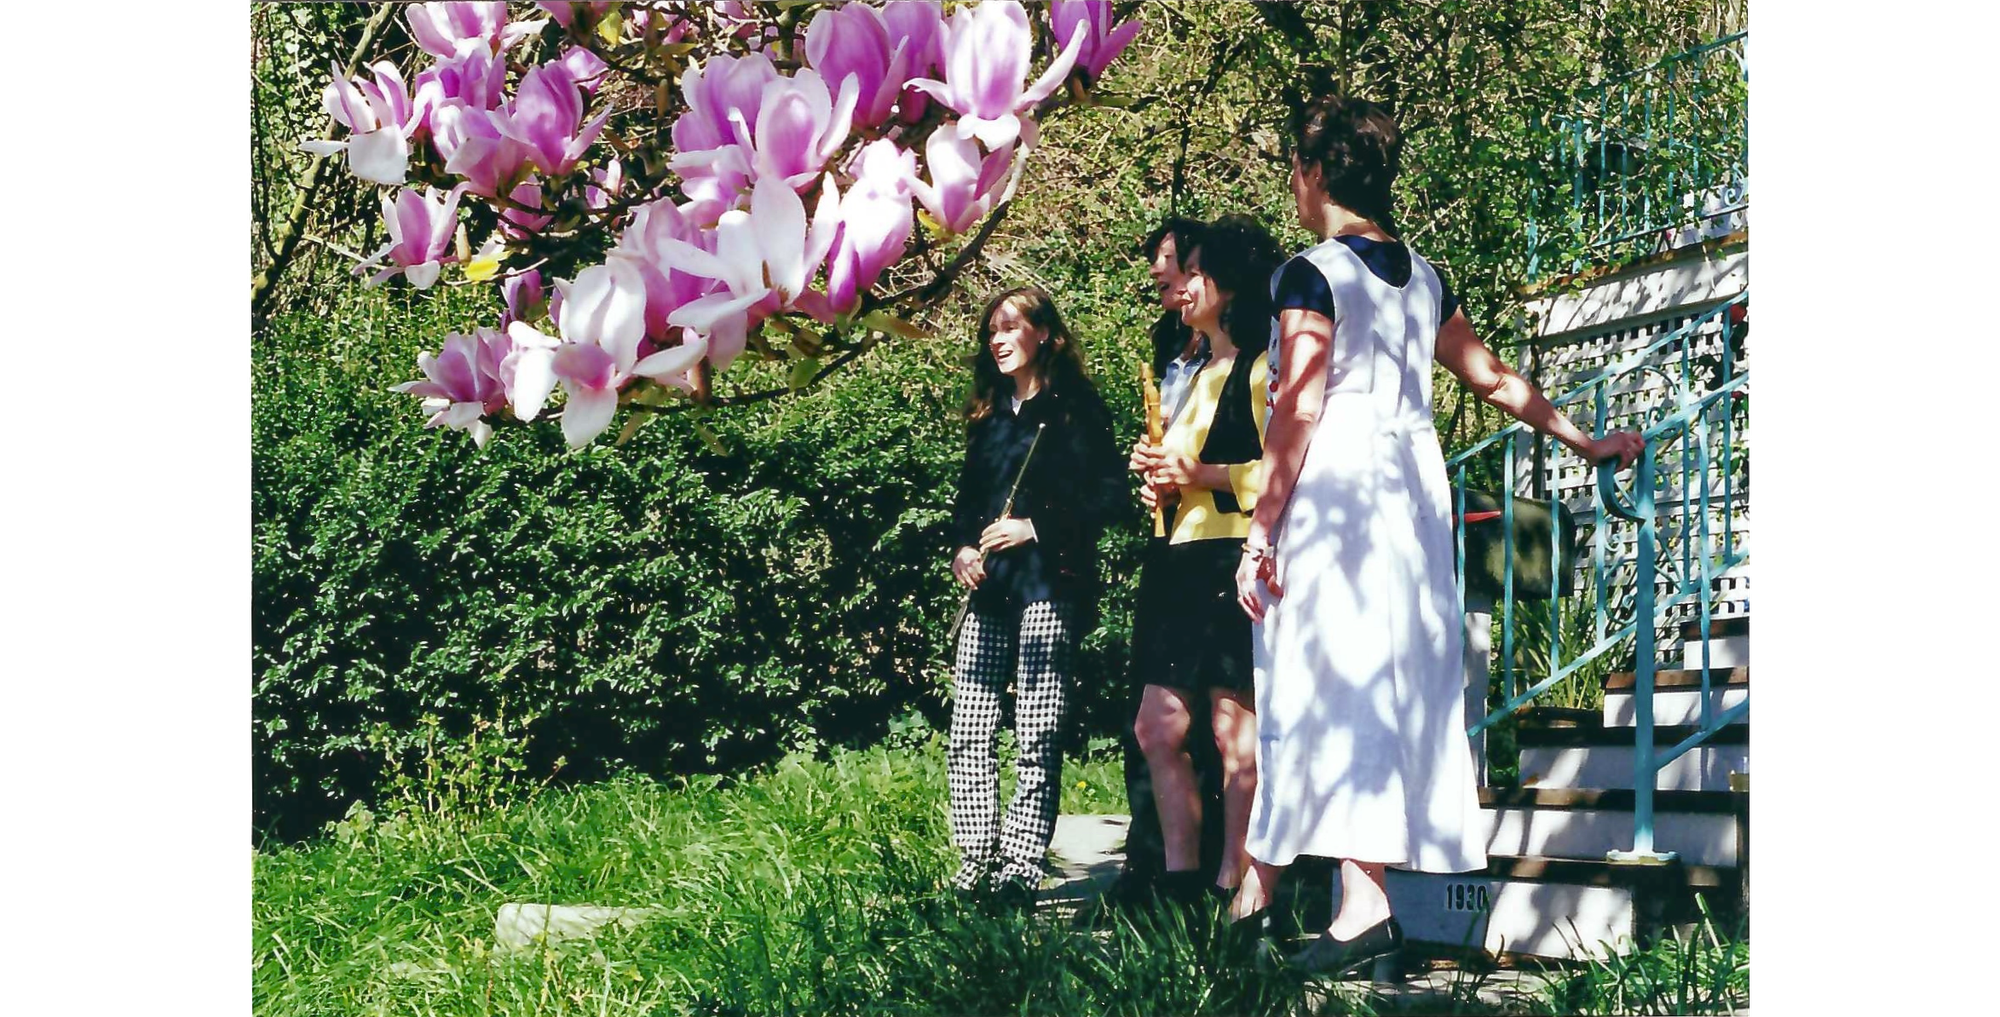 Photo of four women with instruments, singing, in front of steps with magnolia branch in foreground